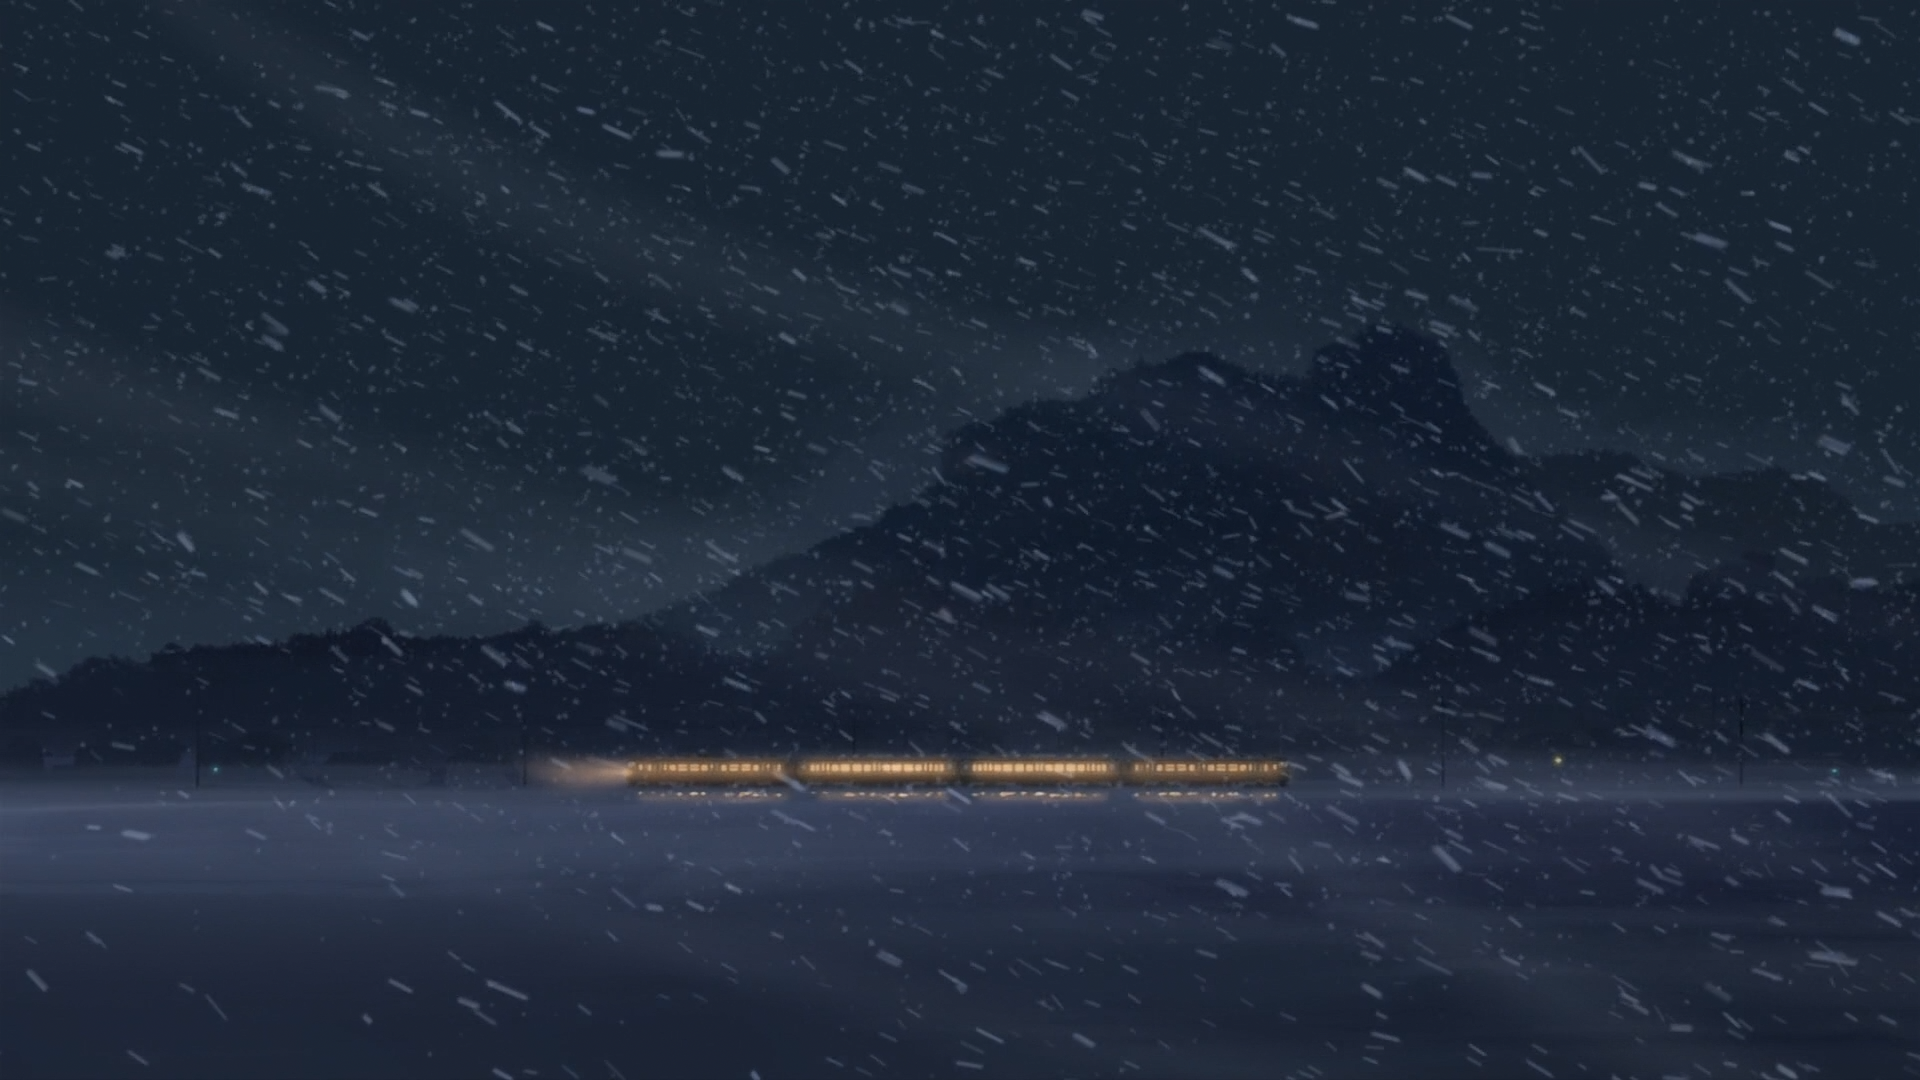 1920x1080 5 Centimeters Per Second Wallpaper Background Image. 